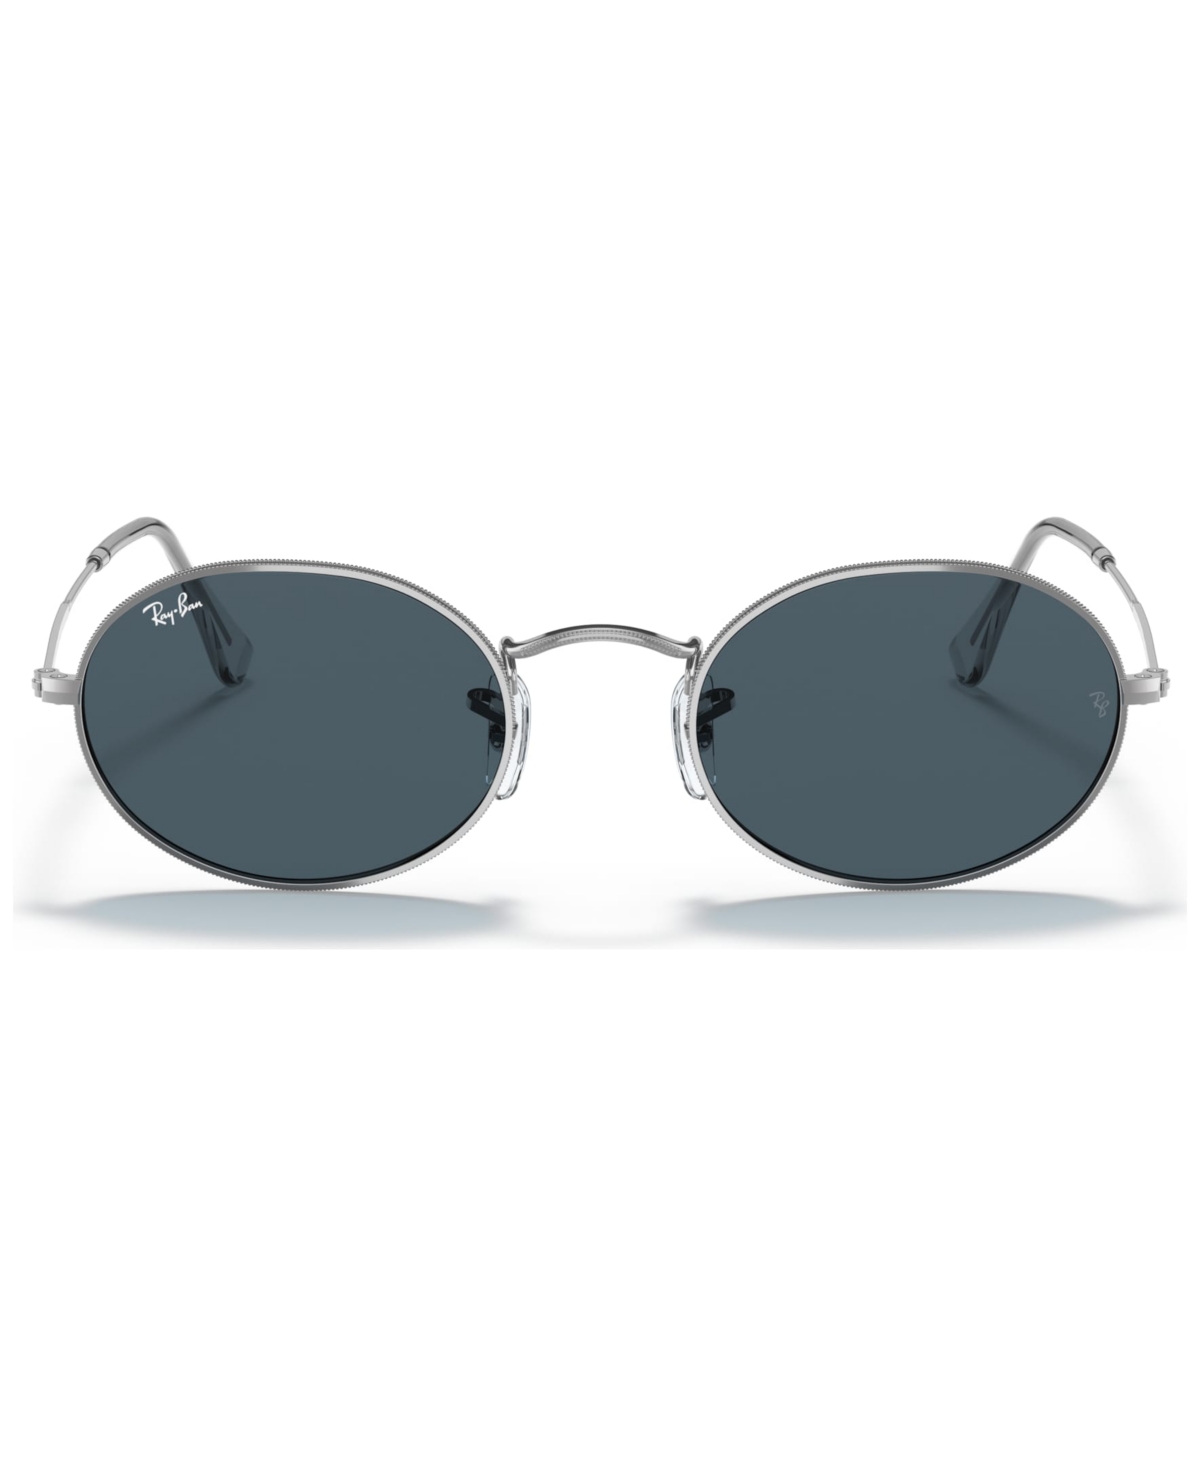 Ray Ban Sunglasses, Rb3547 51 In Silver-tone